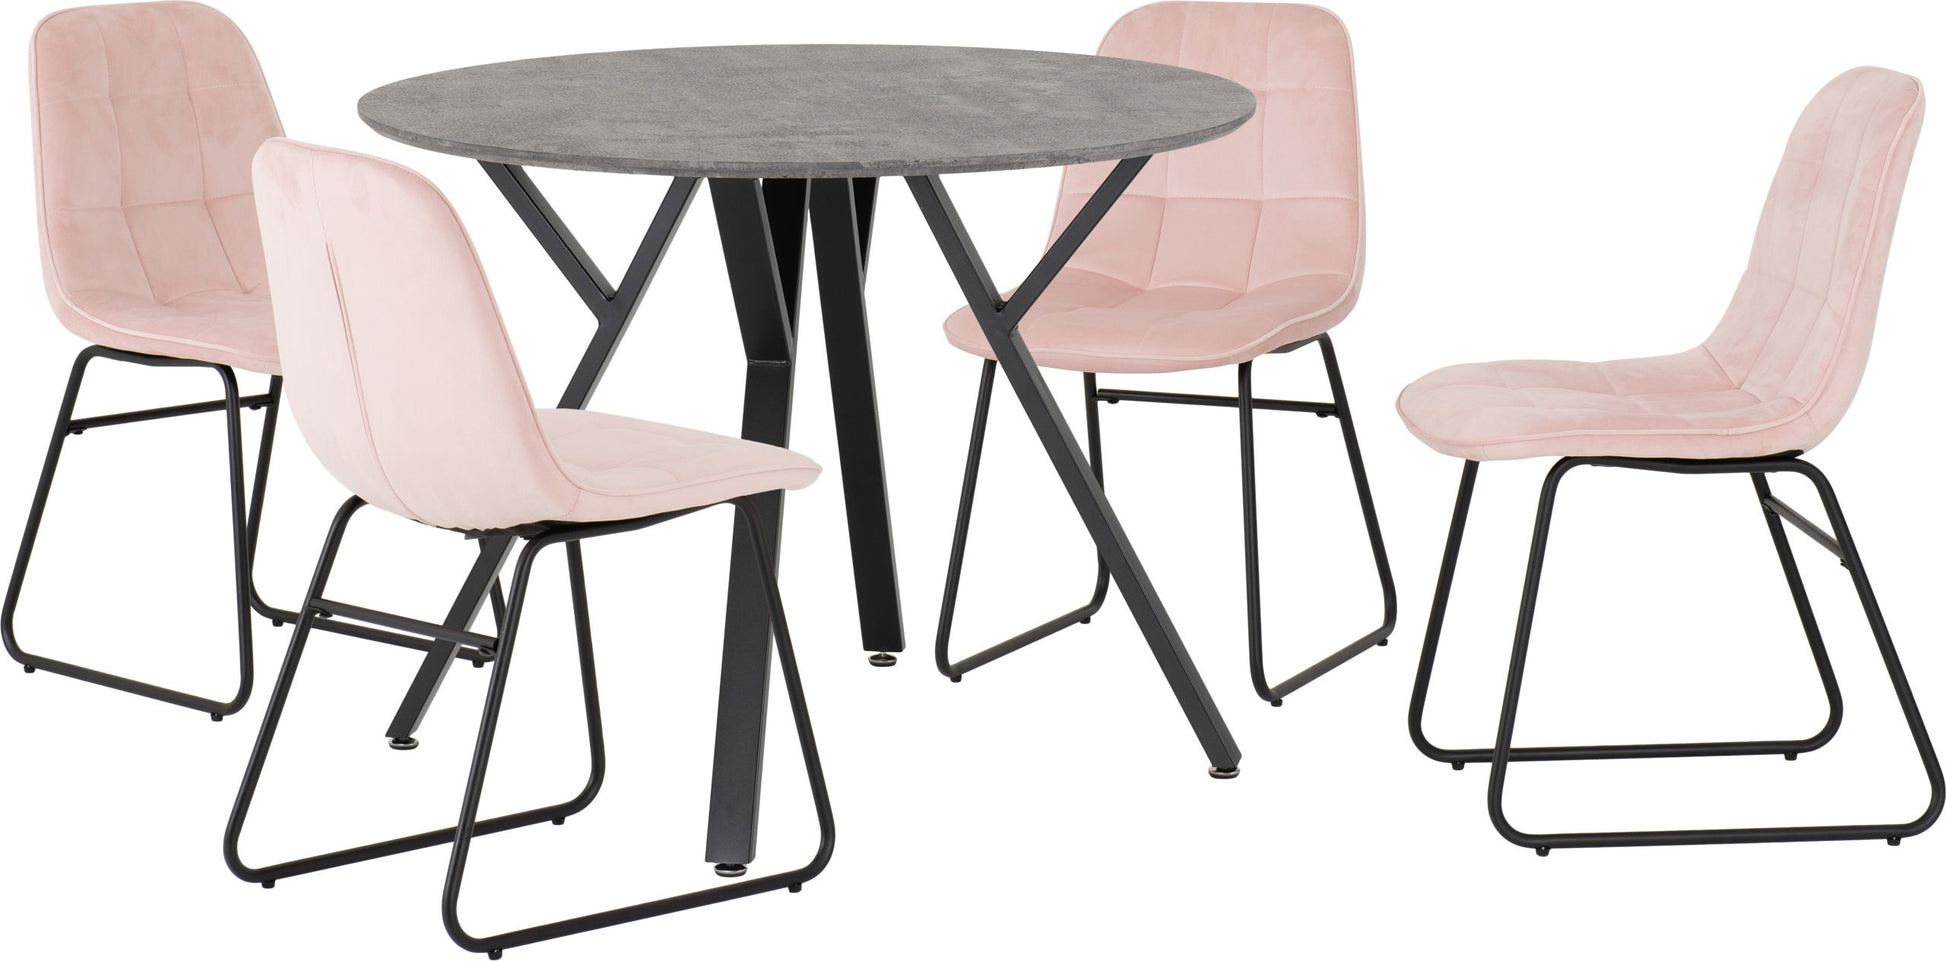 Athens Round Dining Set with Lukas Chairs - Concrete Effect/Black/Baby Pink Velvet